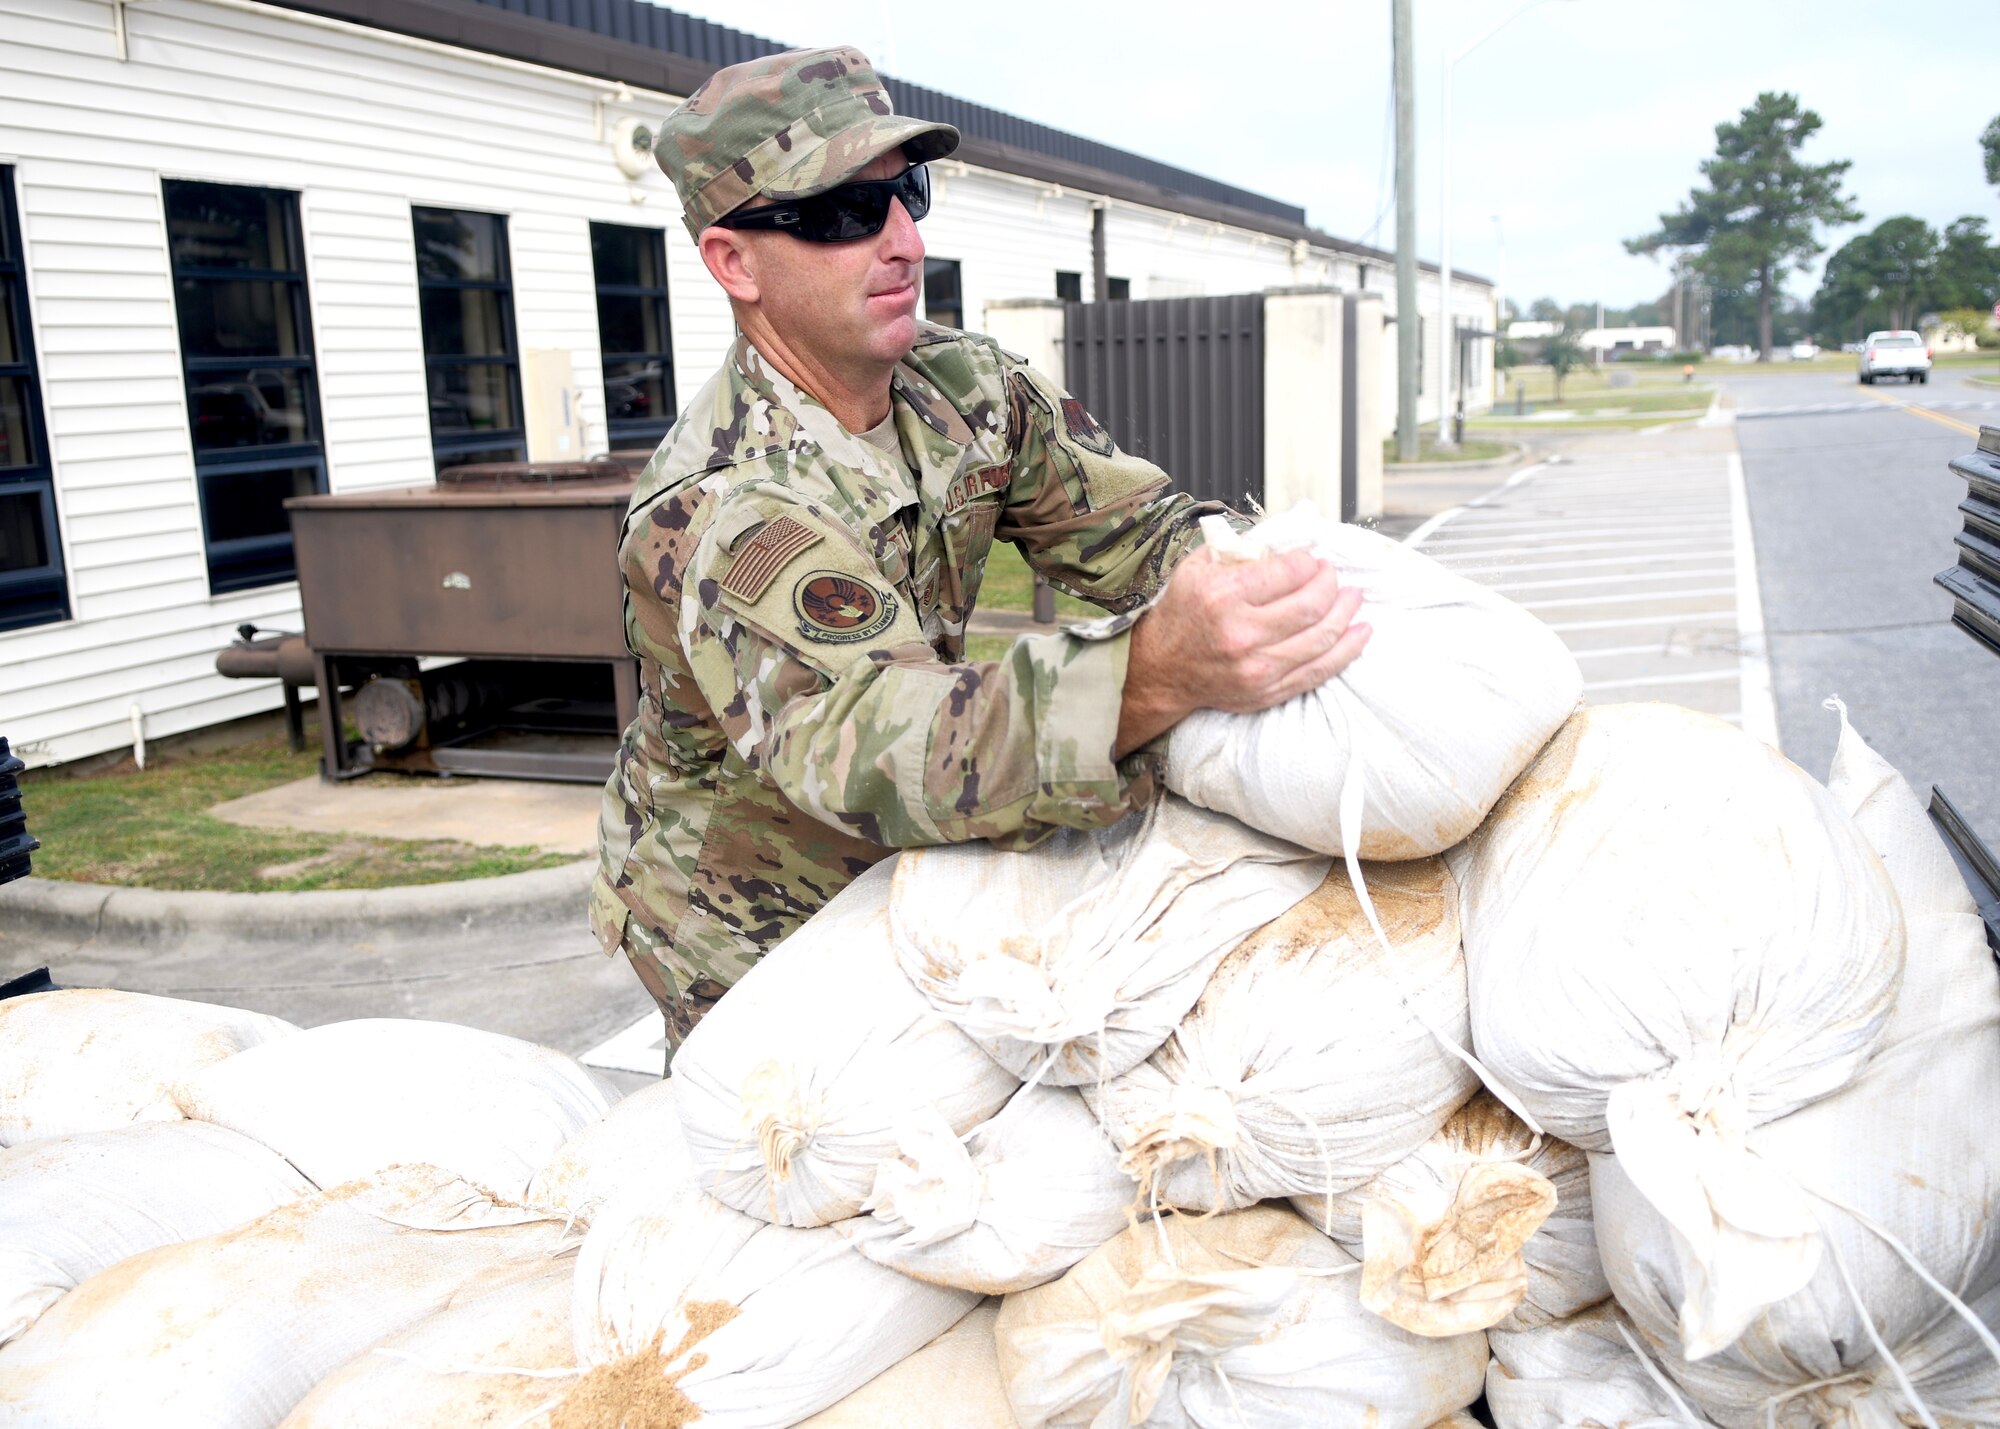 Seymour Johnson Air Force Base, N.C. — Tech Sgt Thomas Hartt, 4th Civil Engineer Squadron pavement and production specialist, unloads sand bags from a truck Sept. 4, 2019, at Seymour Johnson Air Force Base, North Carolina. Airmen and their families assigned to Seymour Johnson AFB prepared the installation for possible hurricane winds associated with Hurricane Dorian. (U.S. Air Force photo by Staff Sgt. Michael Charles)